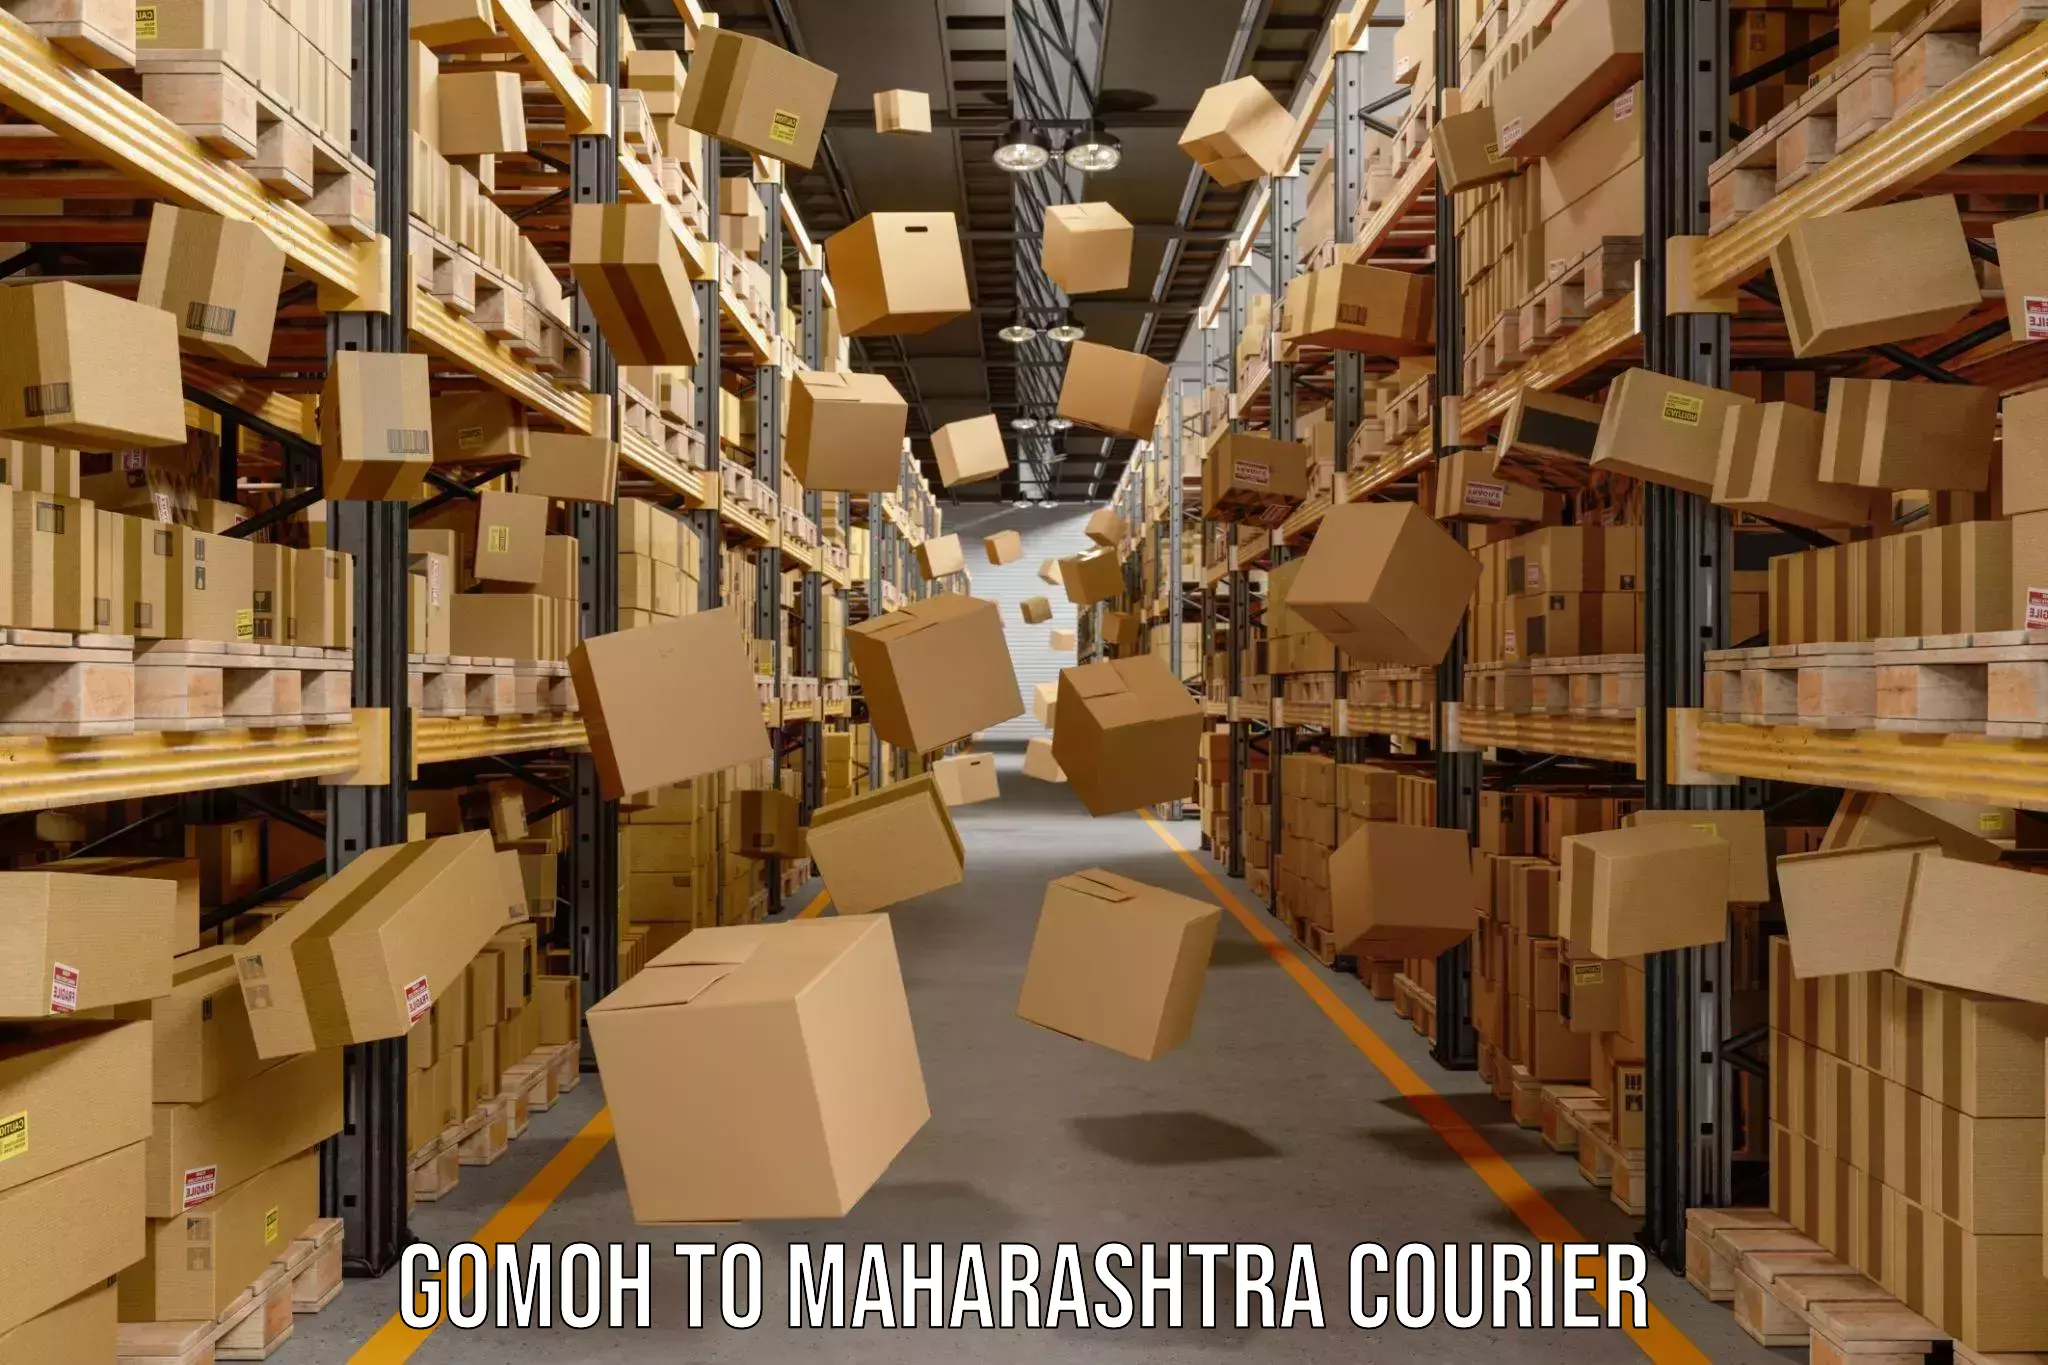 Express delivery network Gomoh to Maharashtra